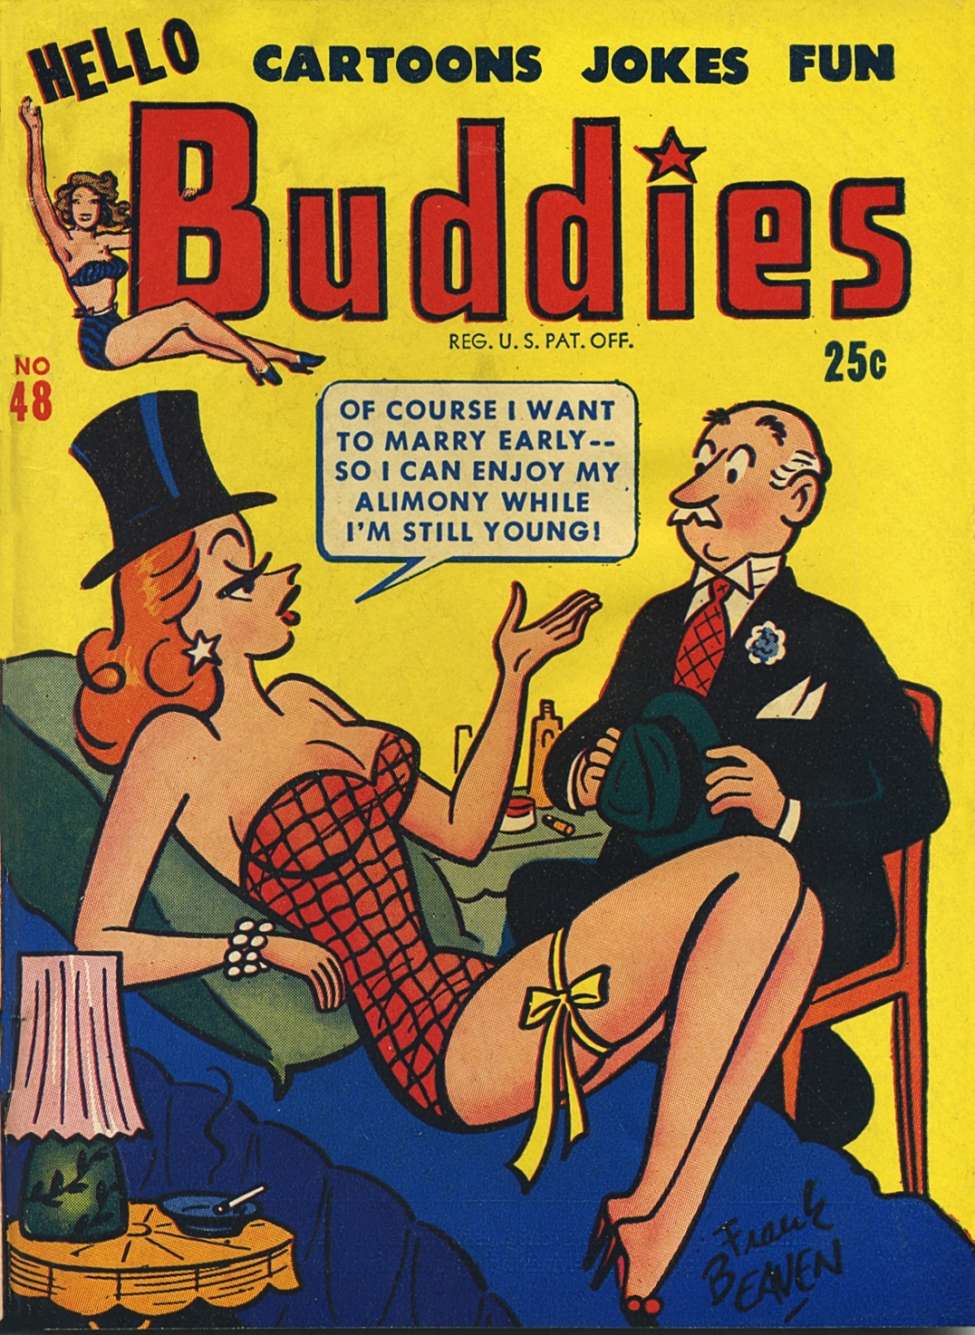 Book Cover For Hello Buddies 48